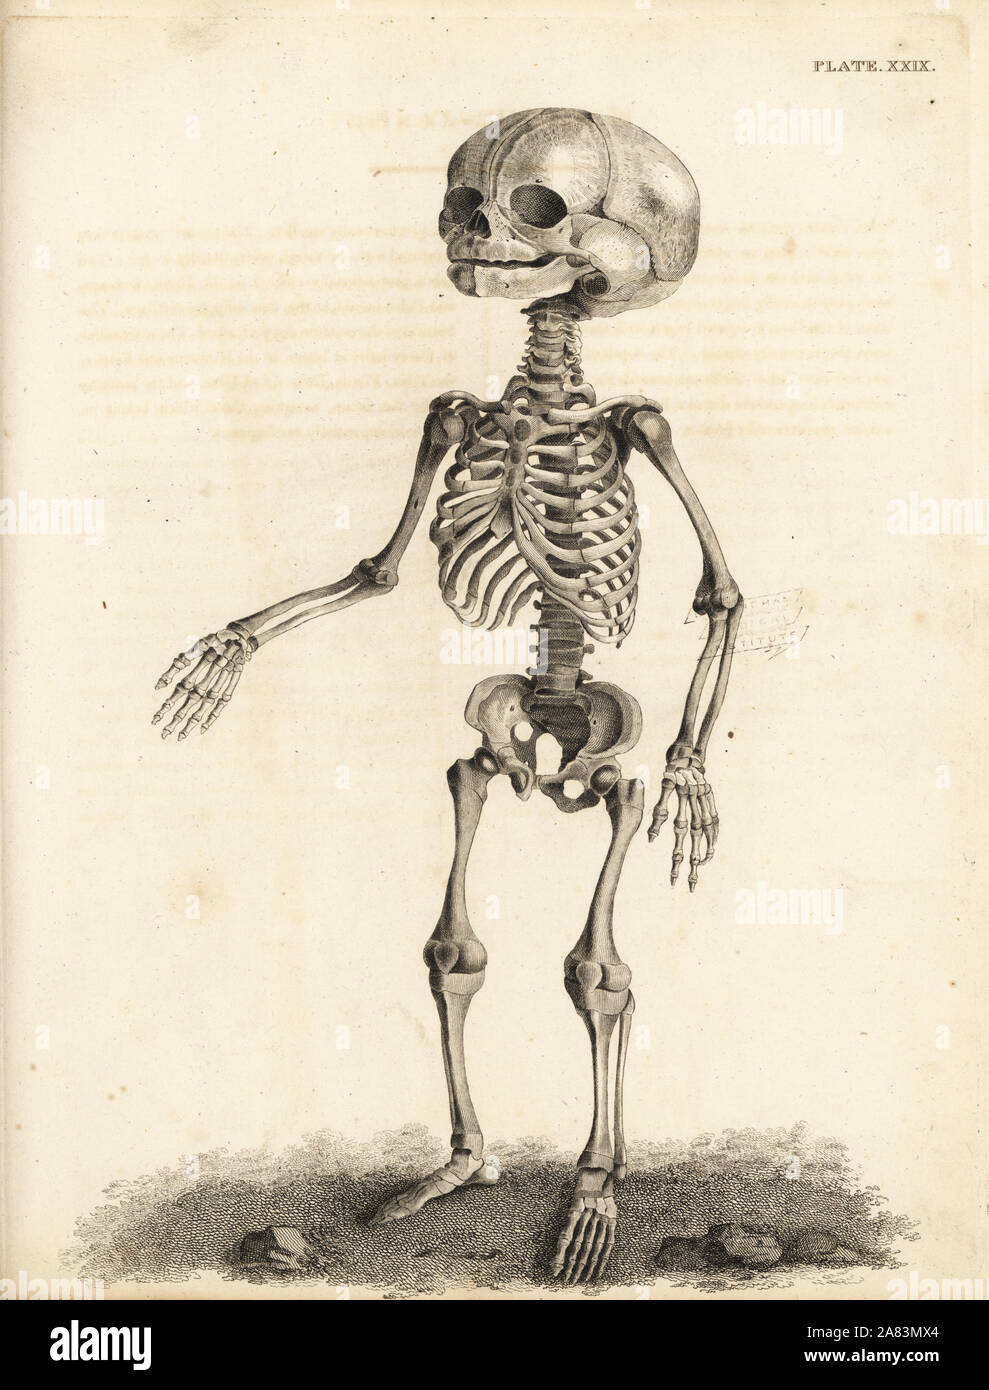 Foetal skeleton at the time of birth. Copperplate engraving by Edward Mitchell after an anatomical illustration by Jean-Joseph Sue from John Barclay's A Series of Engravings of the Human Skeleton, MacLachlan and Stewart, Edinburgh, 1824. Stock Photo